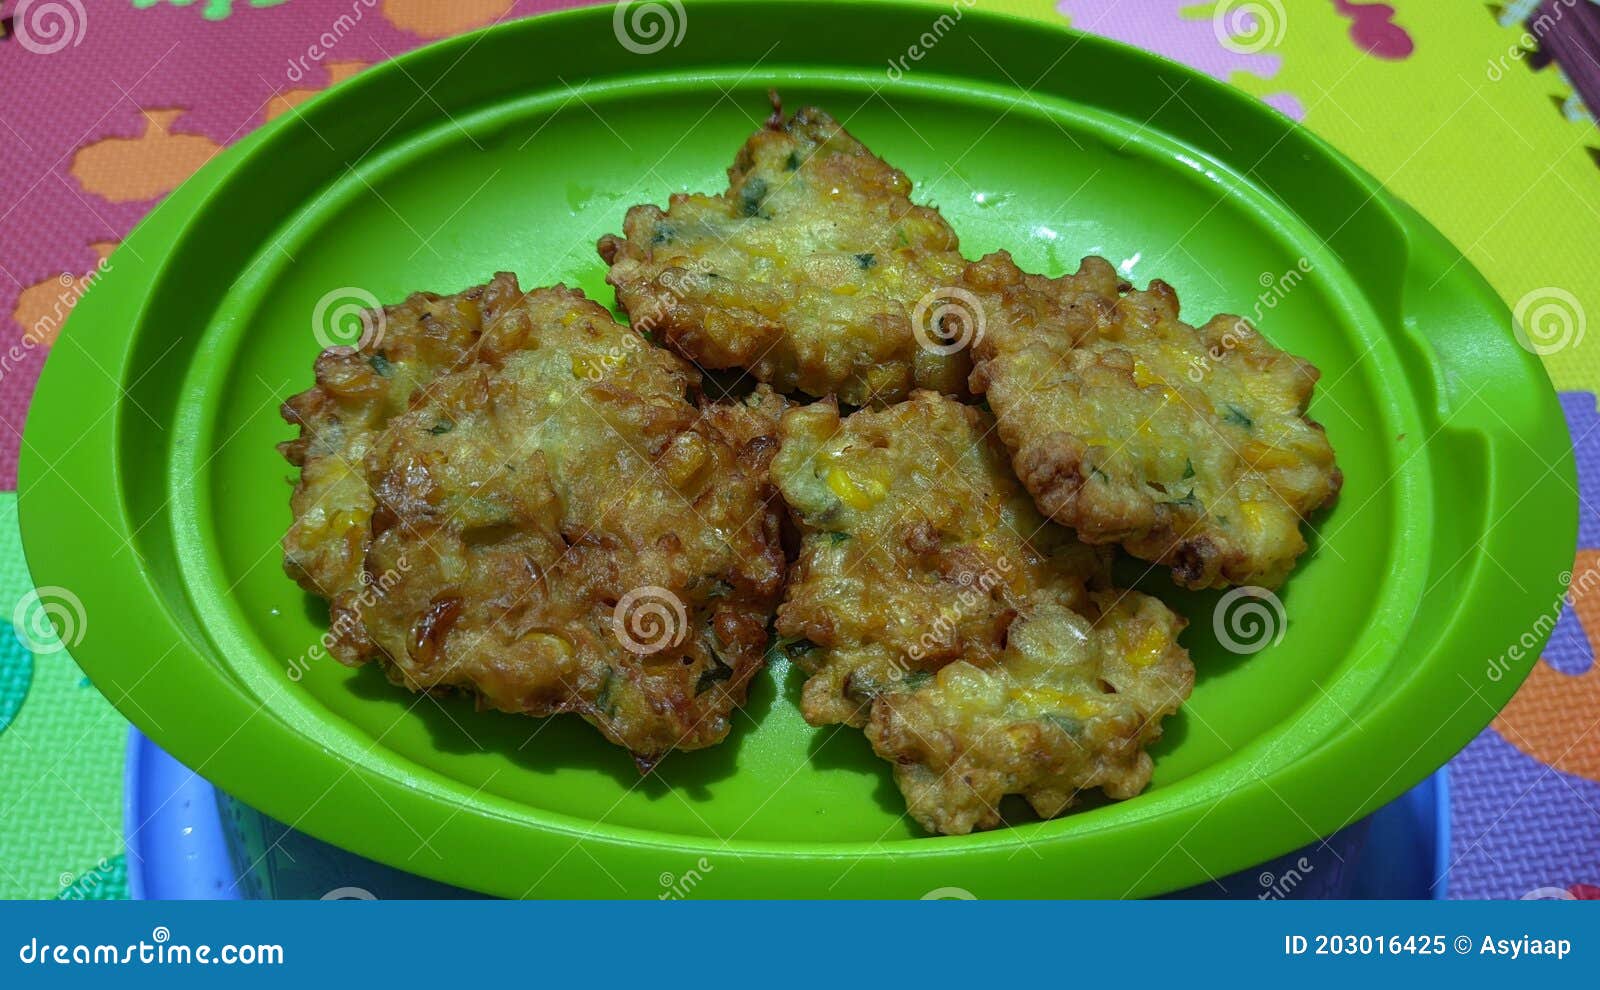 a plate of southeast asian food corncakes called perkedel jagung